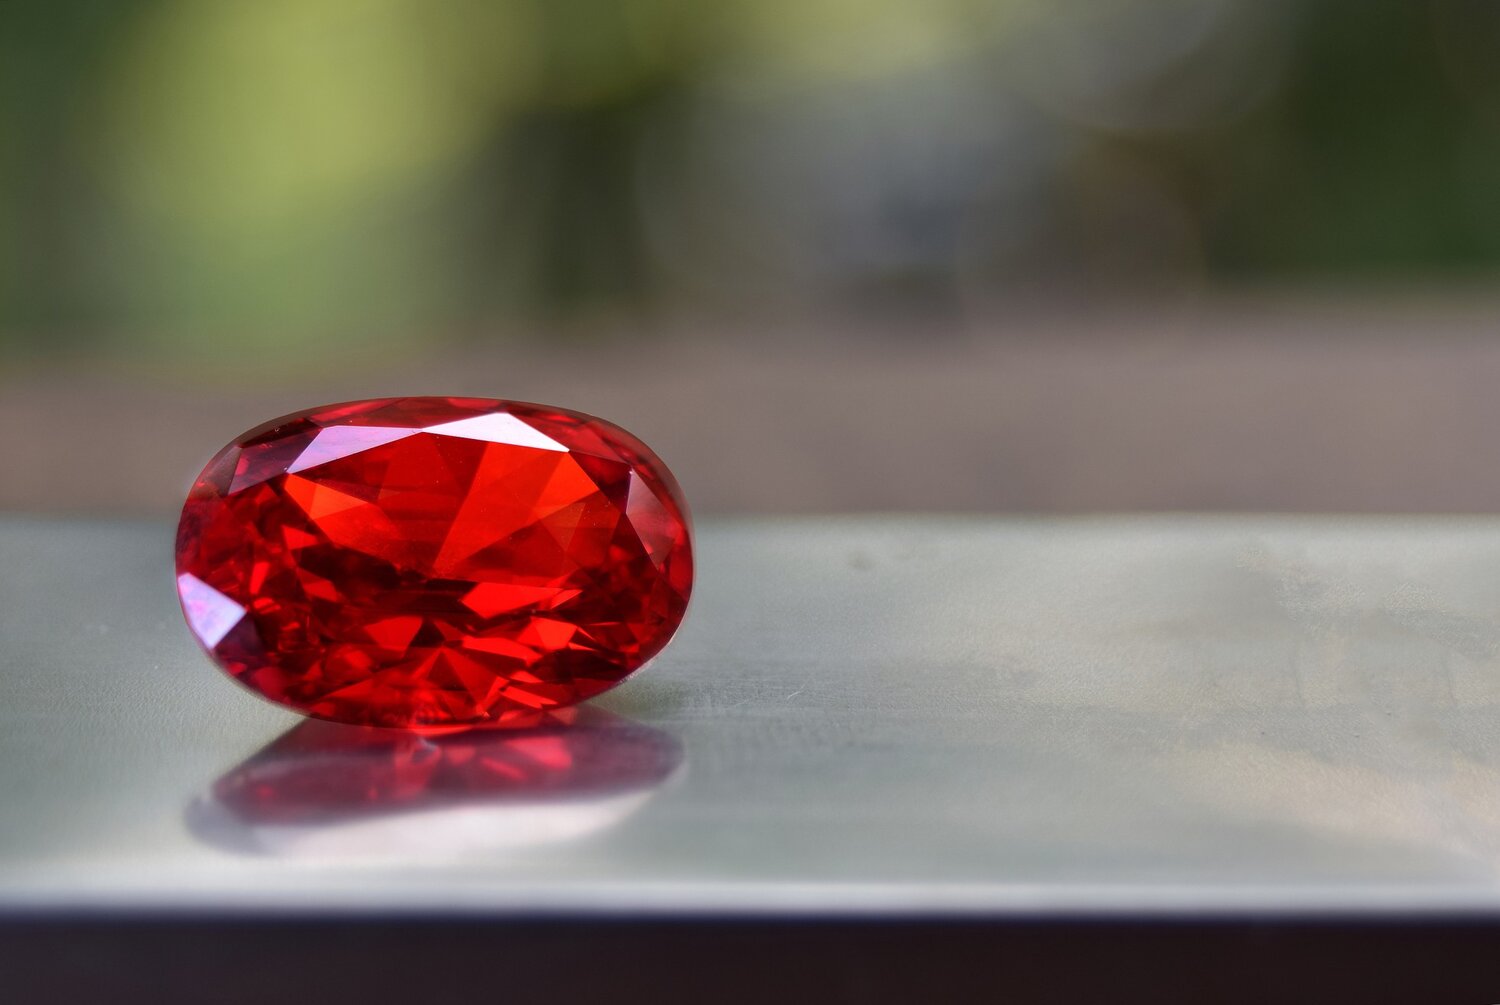 A smooth and polished ruby that is classified as a carbuncle gem